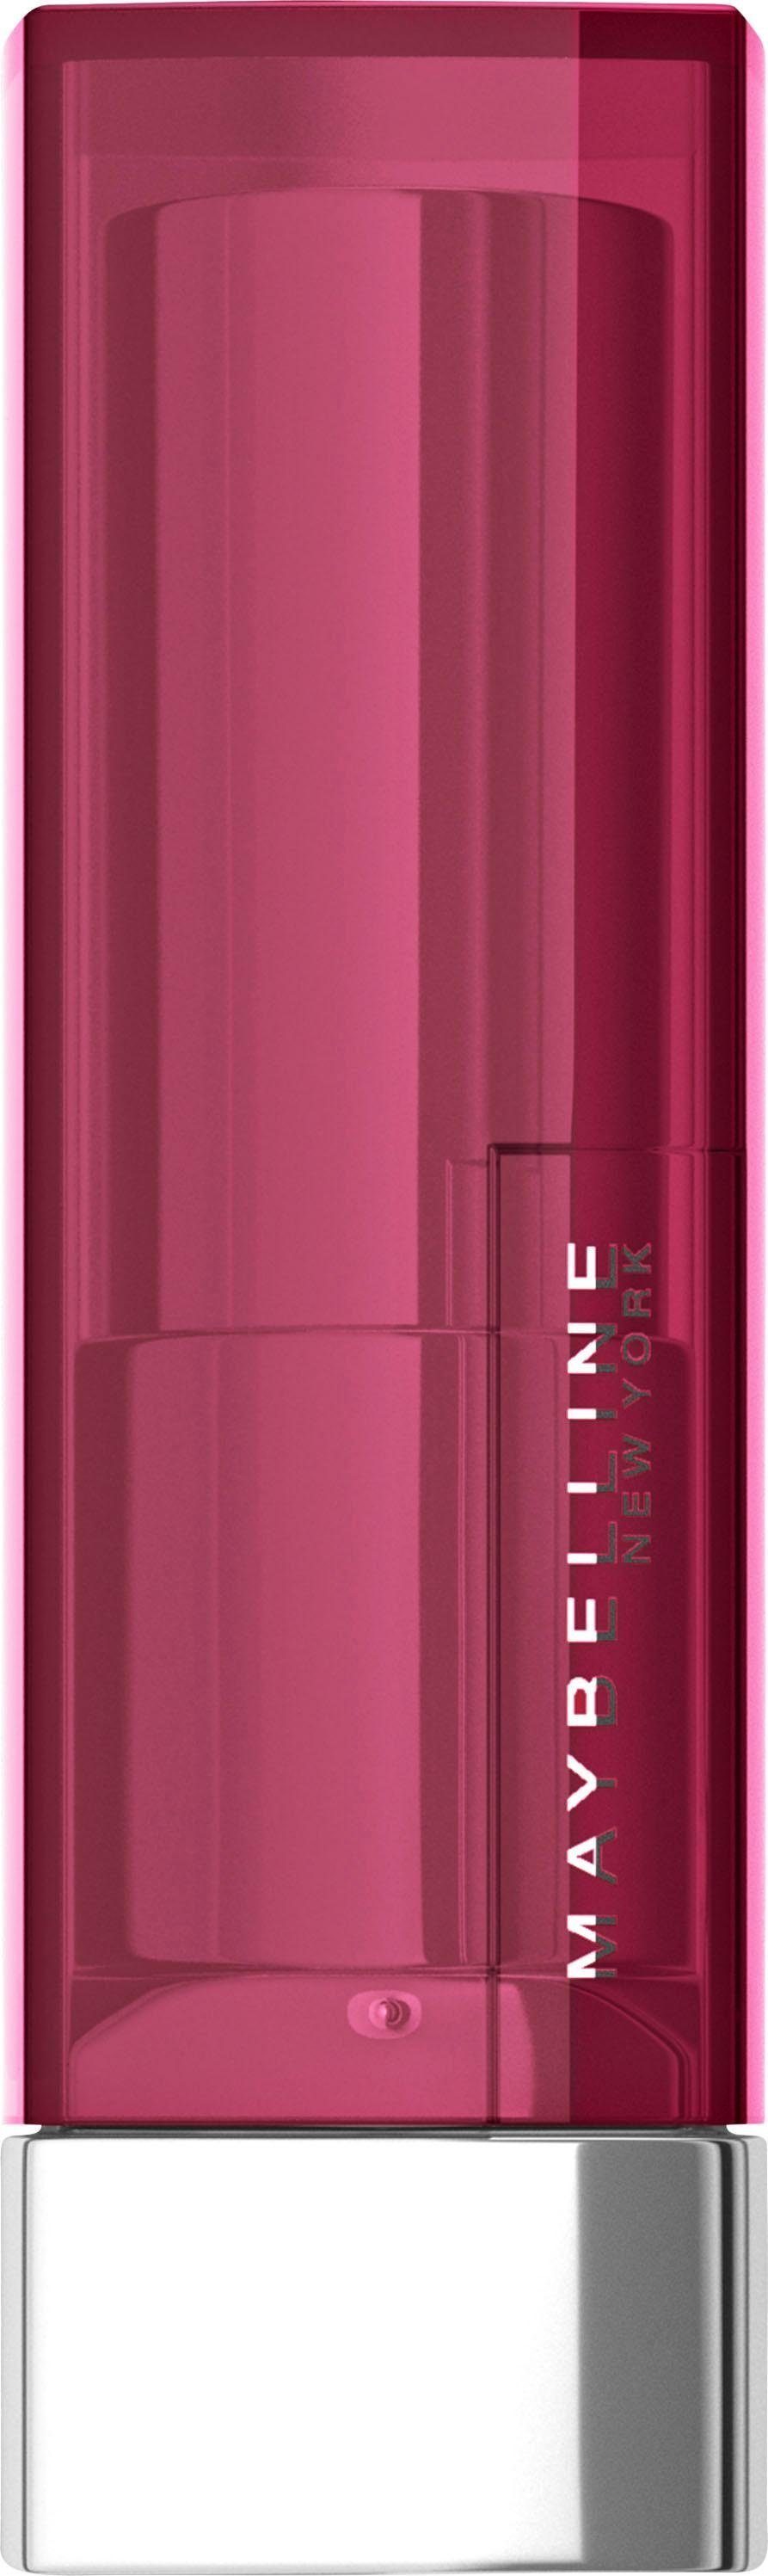 MAYBELLINE NEW YORK Lippenstift Sensational stripped 300 Roses Smoked rose Color